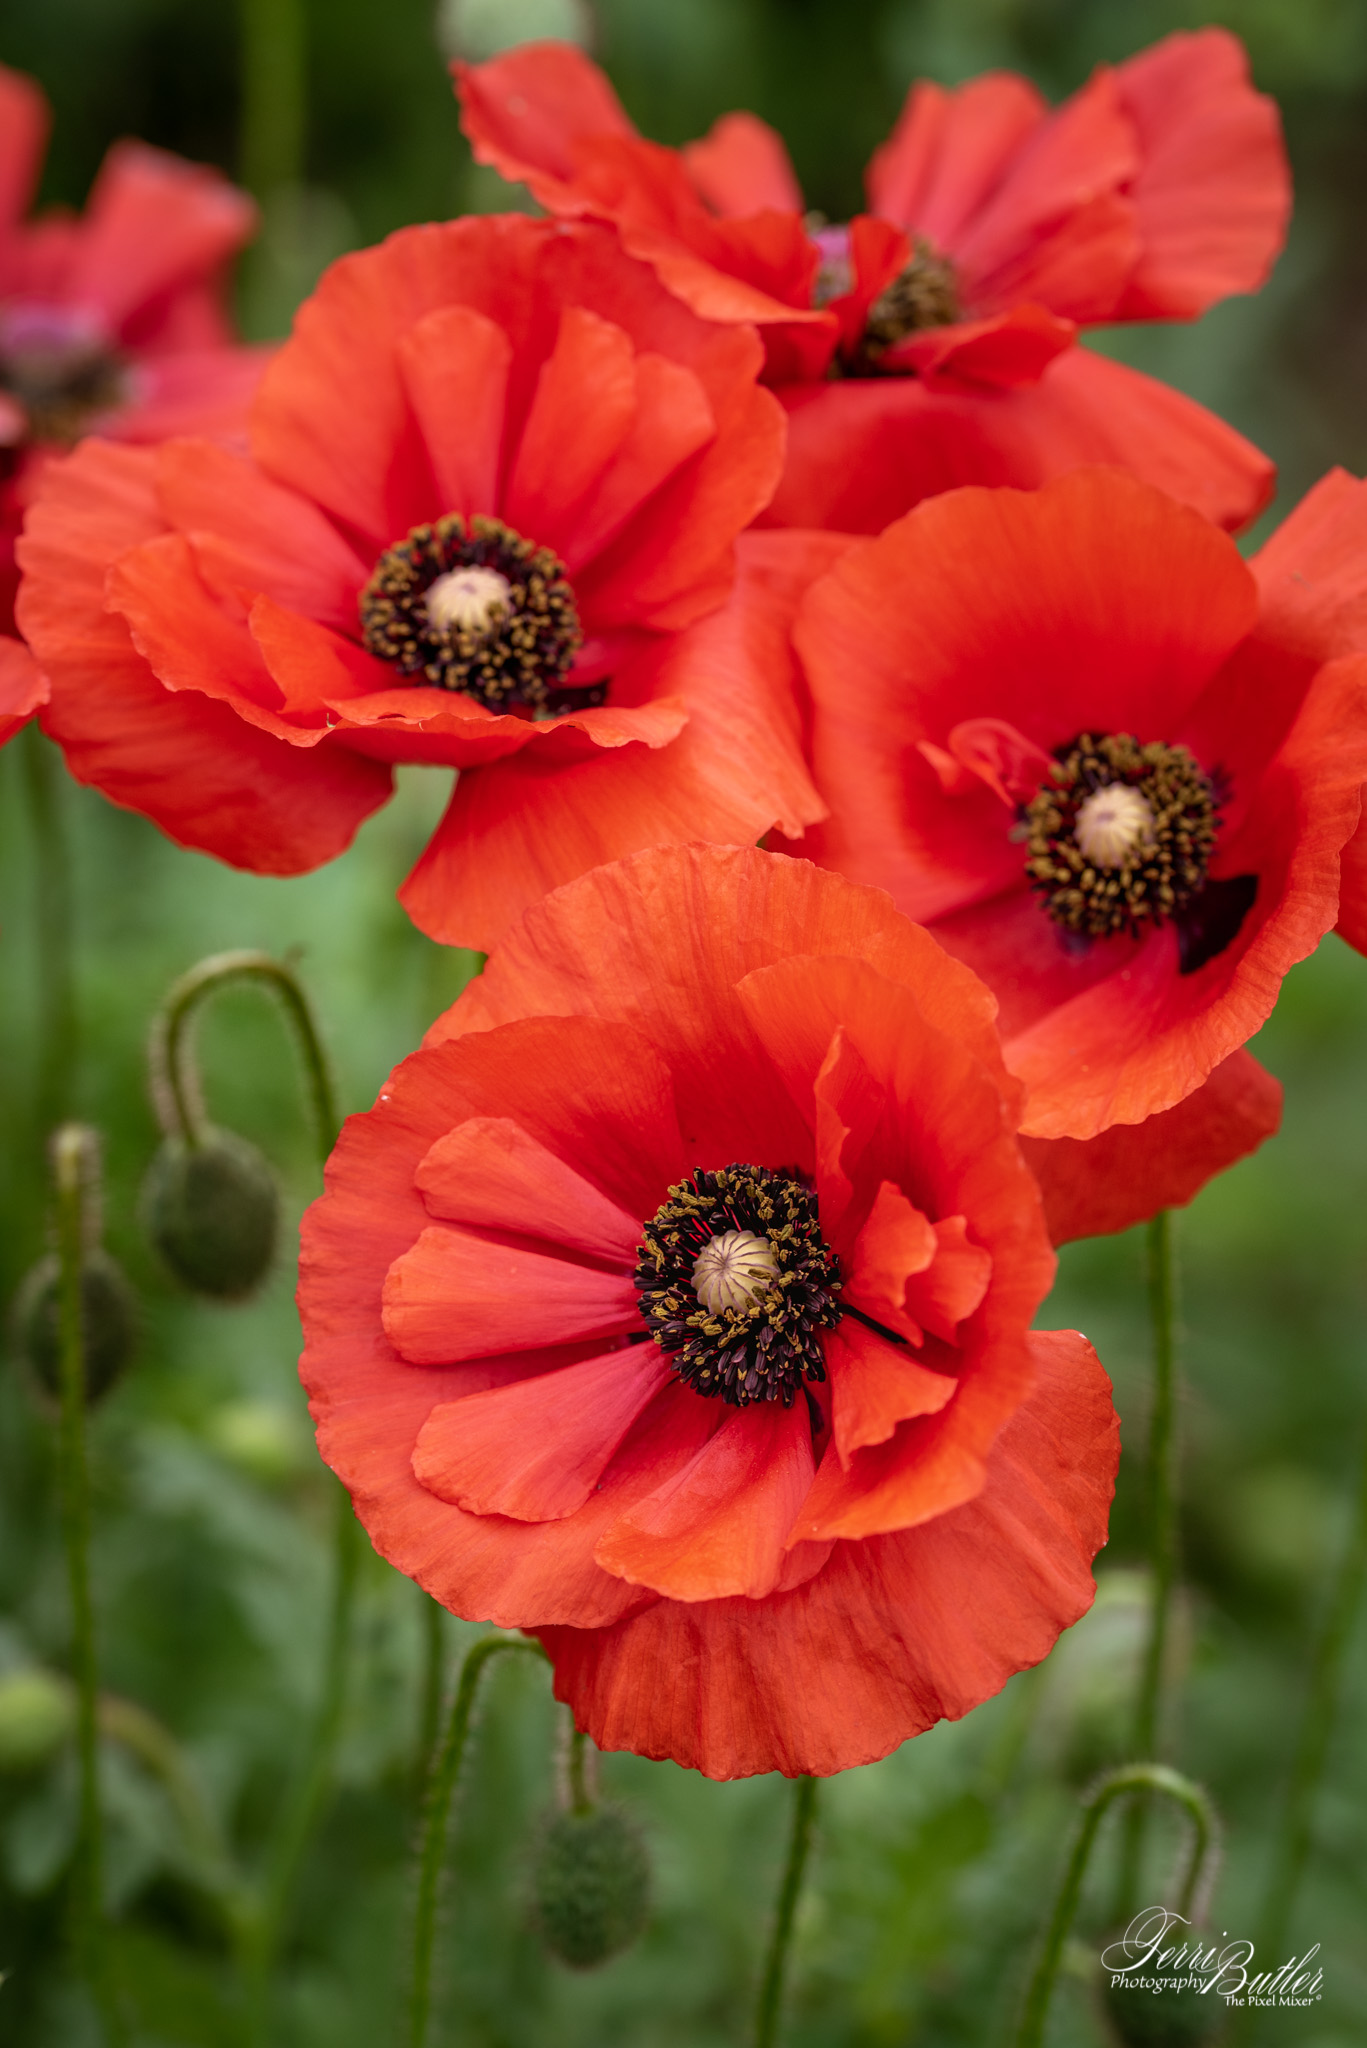 Poppies, Poppies and More Poppies